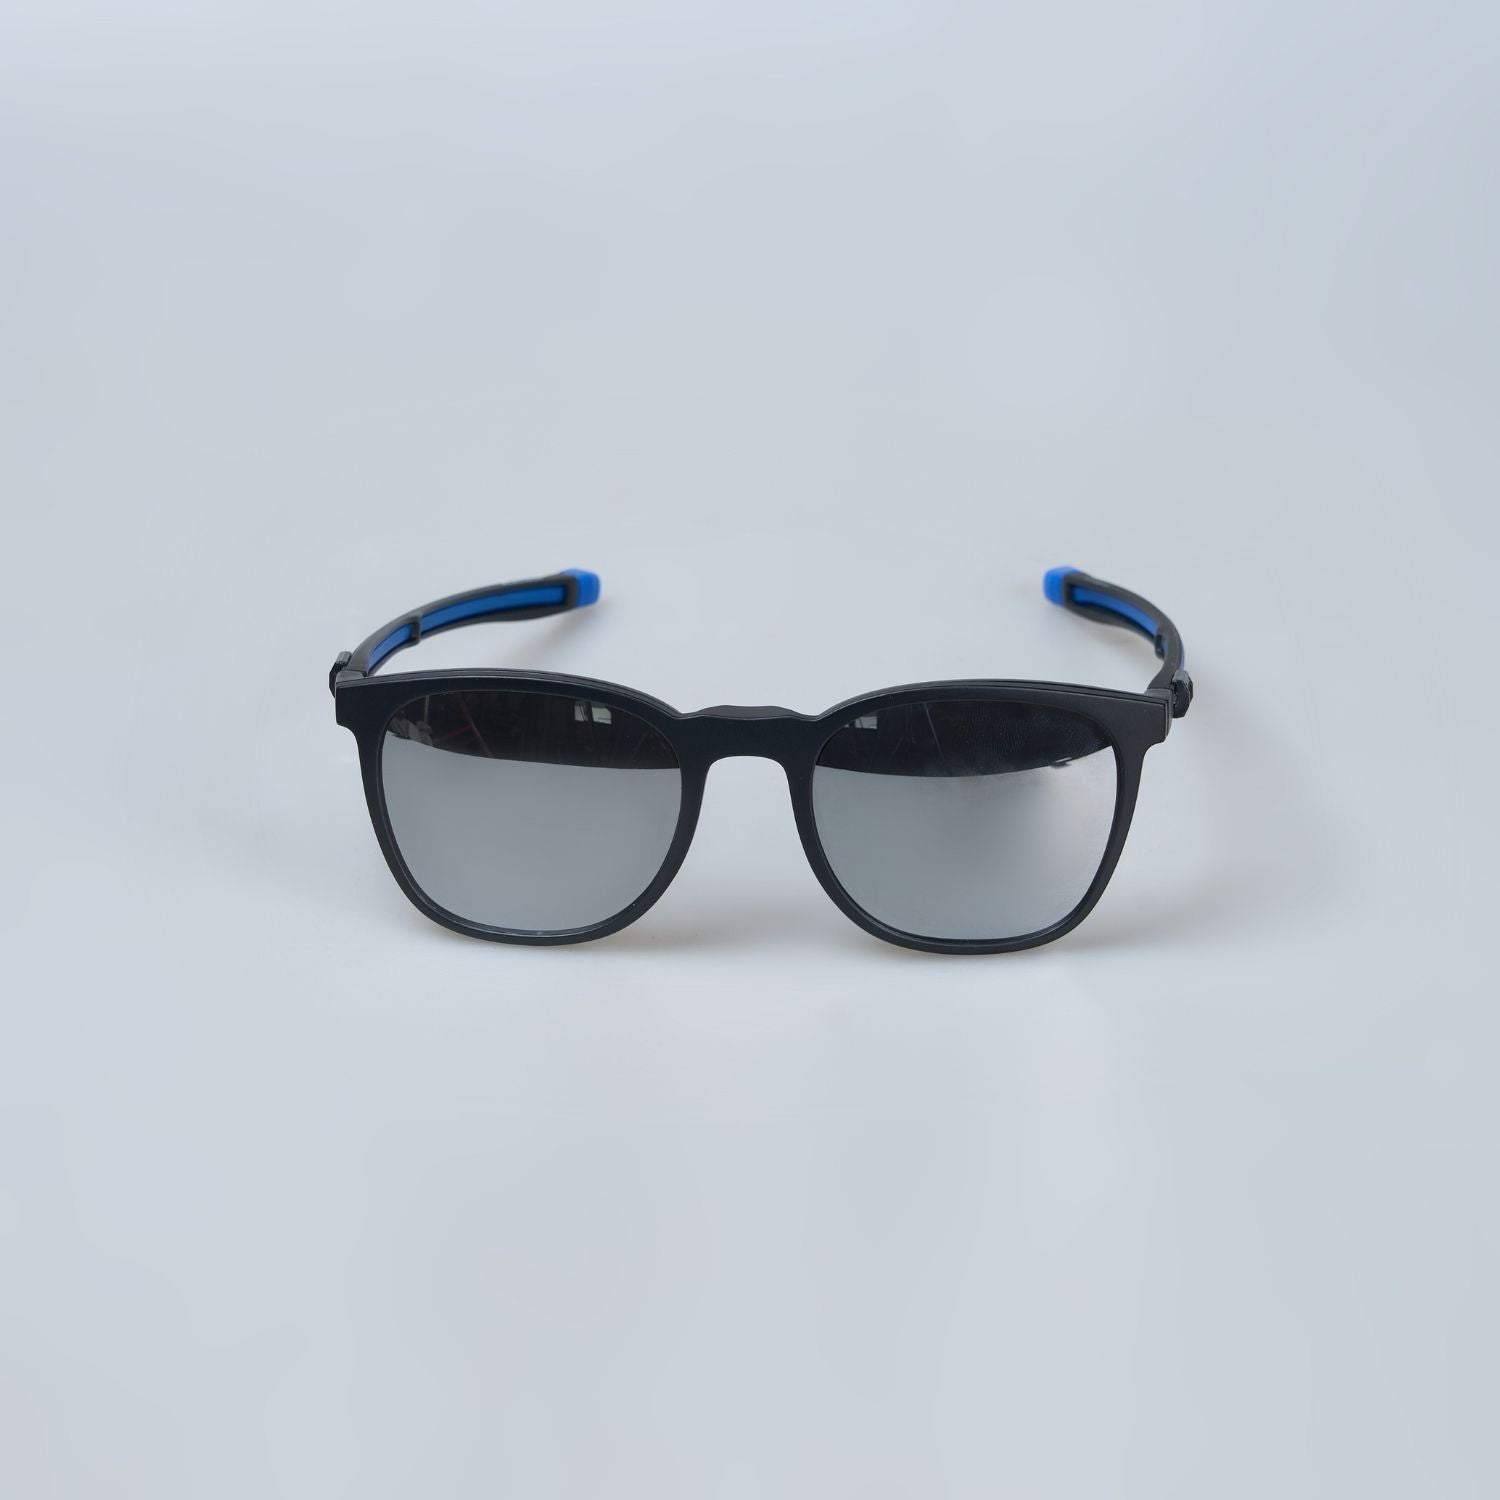 Day-Night Changeable Lens Wayfarer Sunglasses For Men And Women, front view.